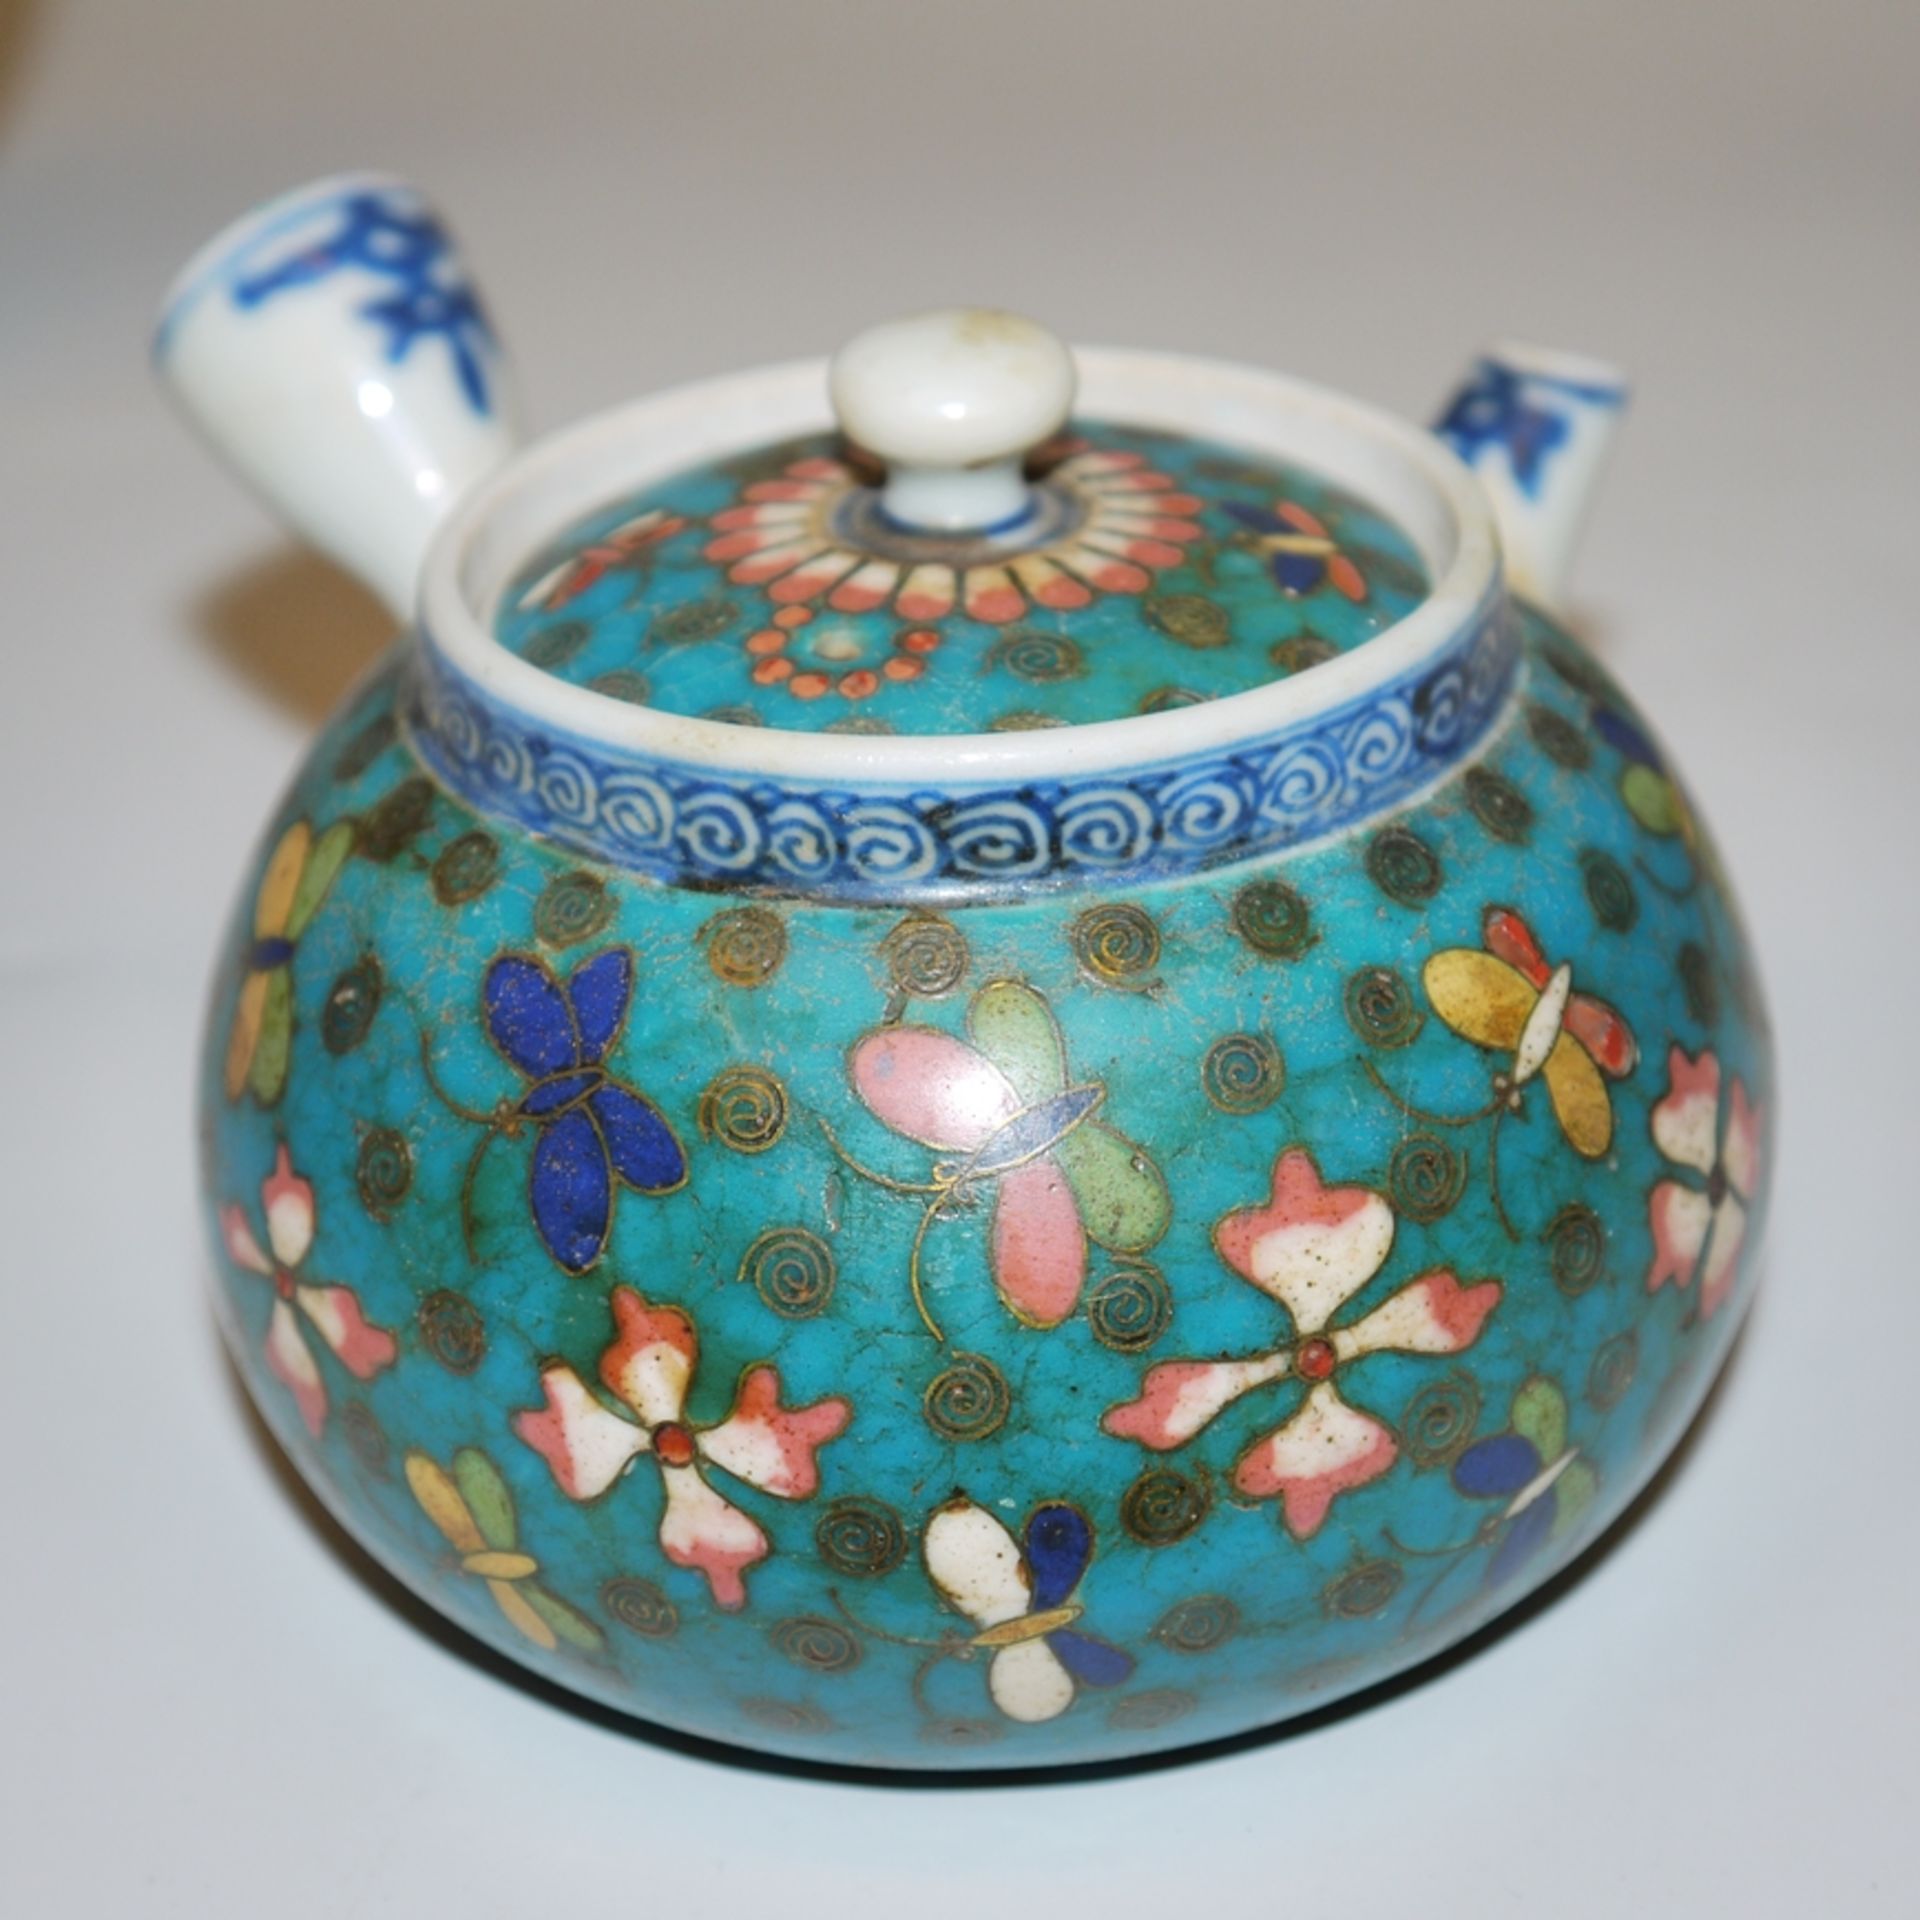 Teapot in "totai shippo" and seven cloisonné vessels from the Japanese Meiji period around 1900 - Image 2 of 2